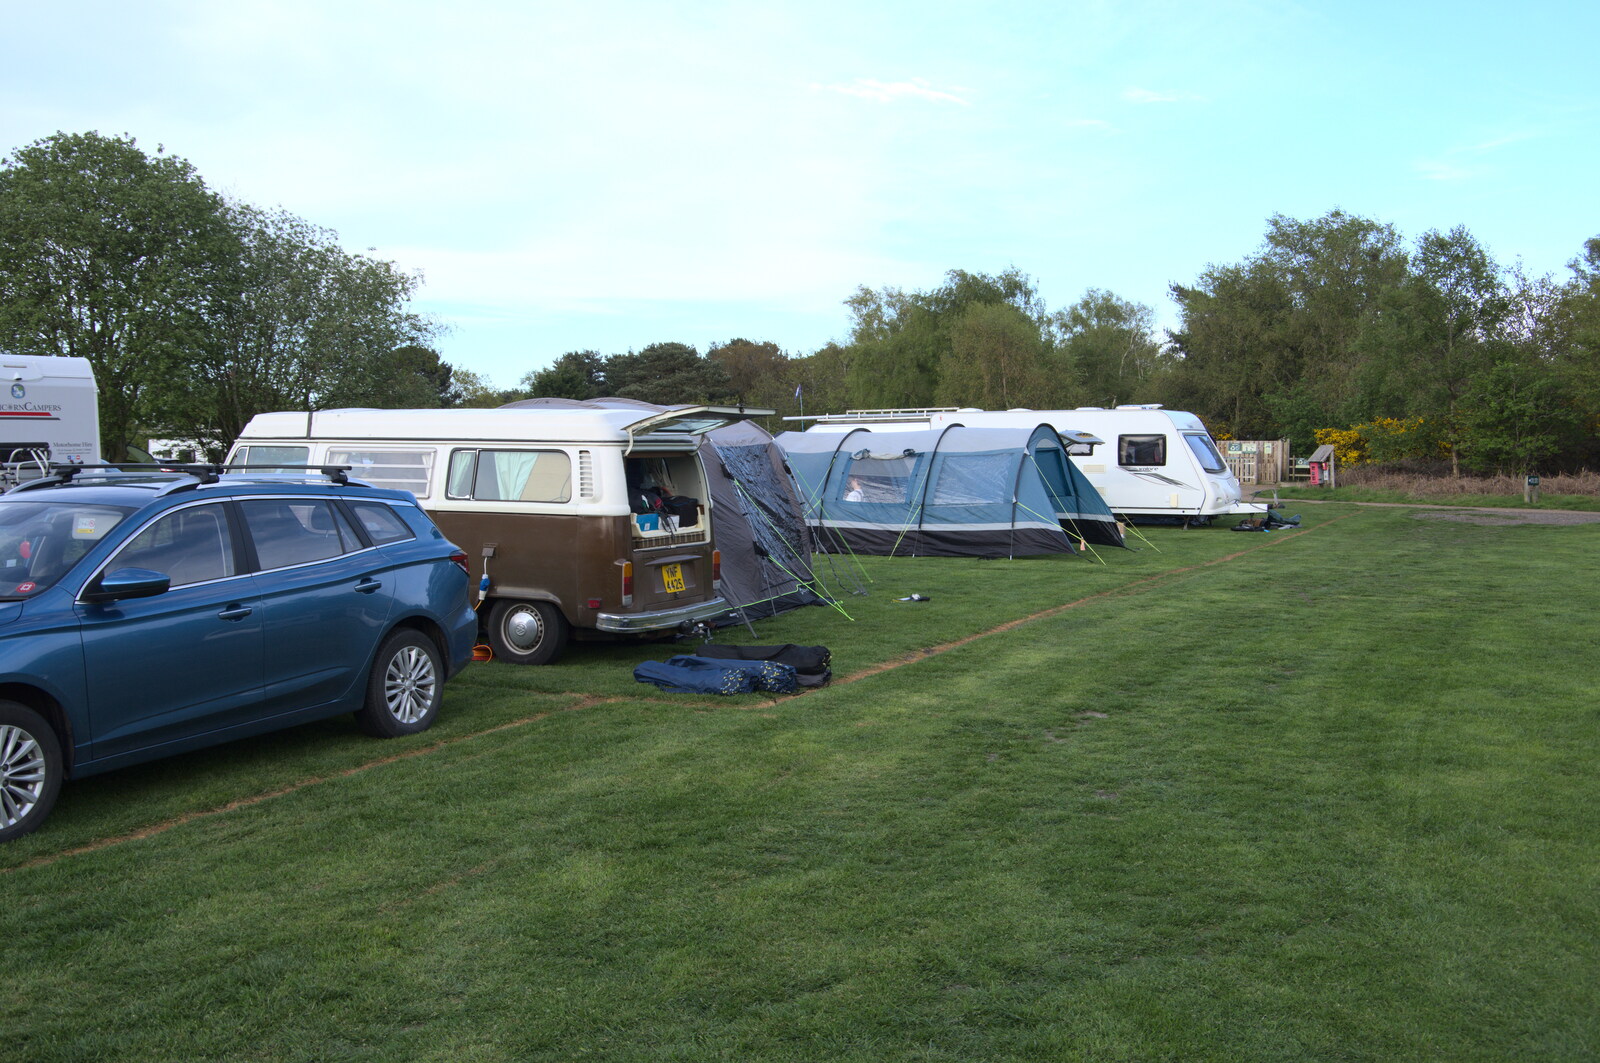 The others have all pitched up from A Coronation Camping Picnic, Kelling Heath, Norfolk - 6th May 2023